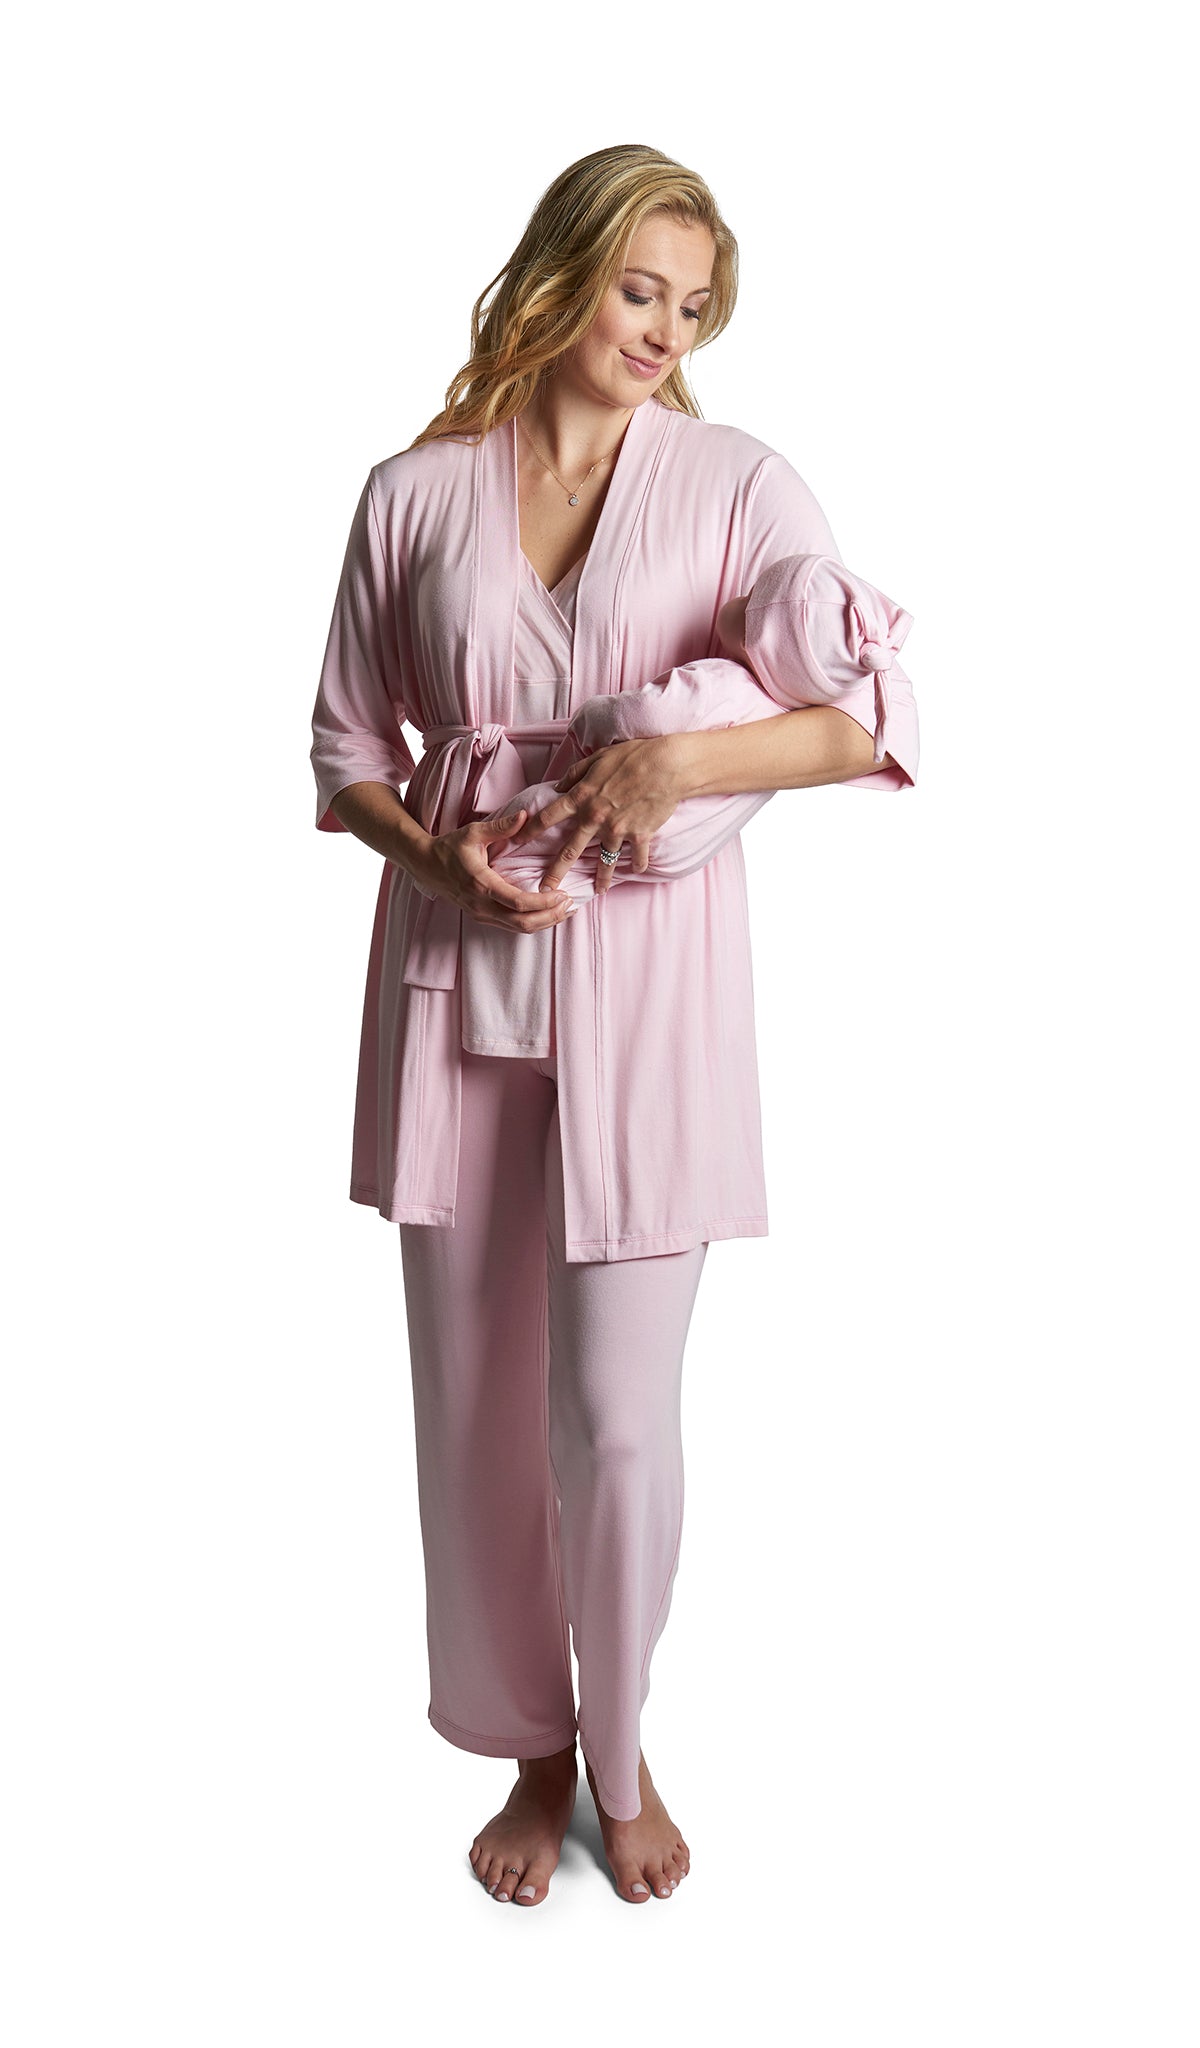 Blush Analise 5-Piece Set. Woman wearing 3/4 sleeve robe, tank top and pant while holding a baby wearing baby gown and knotted baby hat.